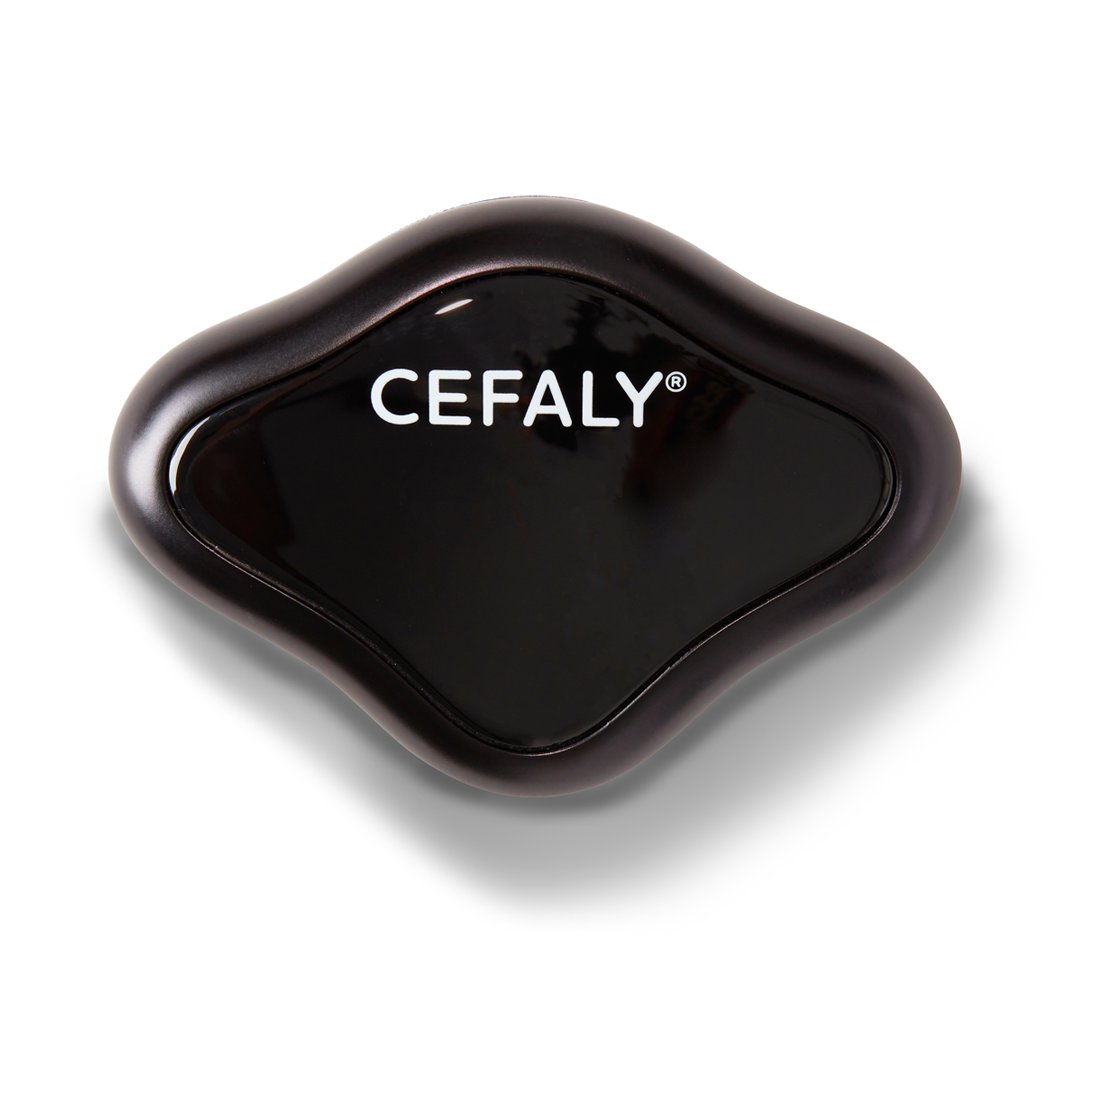  What is included with the Cefaly Migraine treatment and prevention device  1